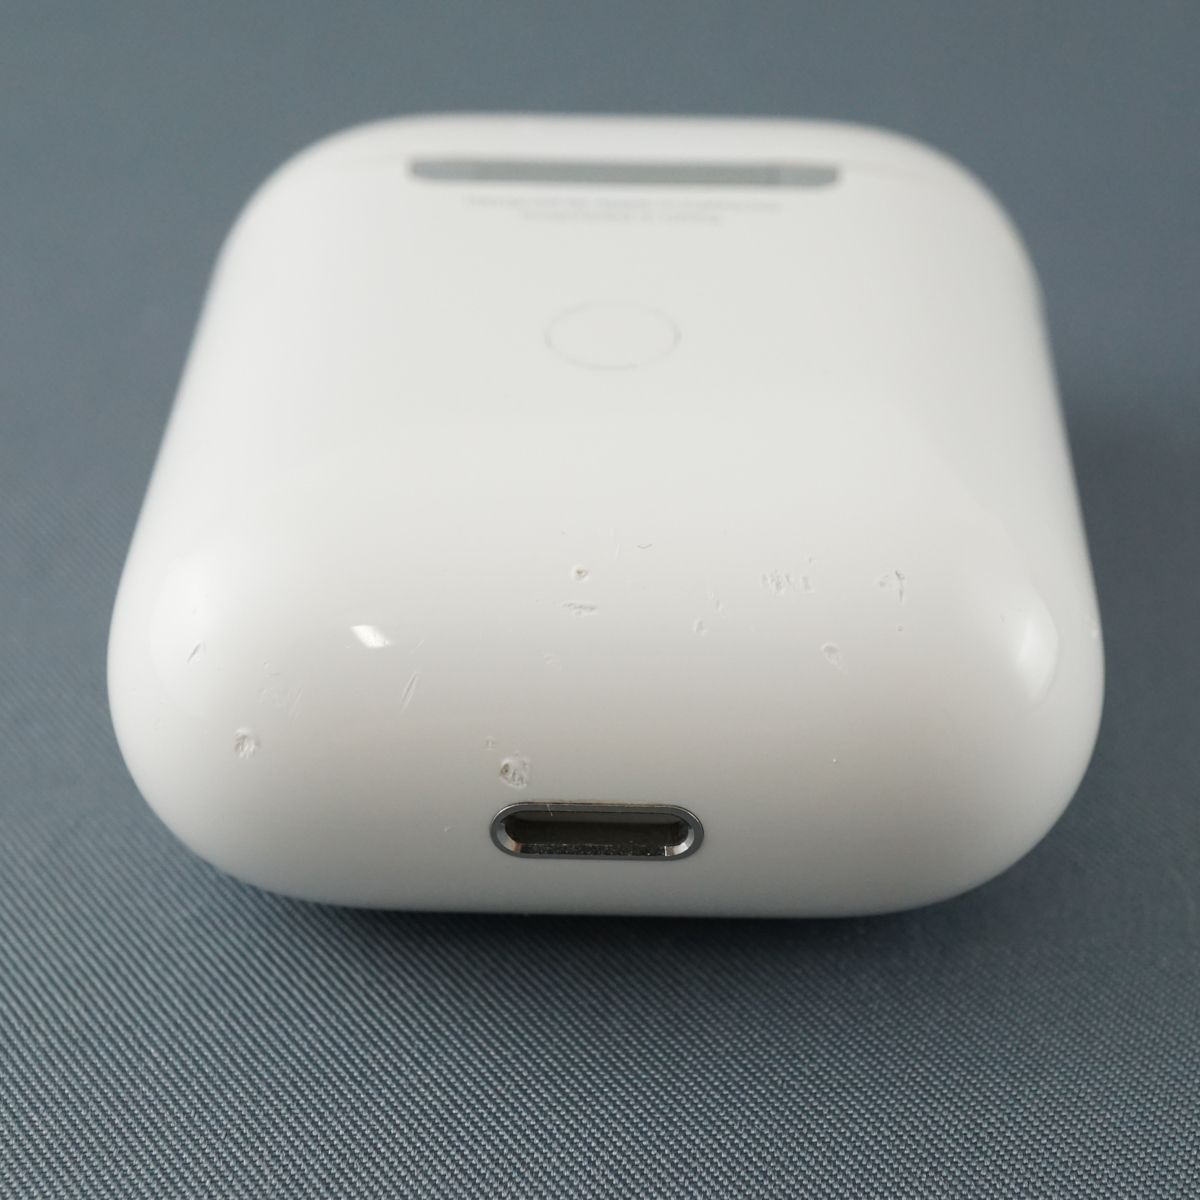 AirPods with Wireless Charging Case エアーポッズ 充電ケース